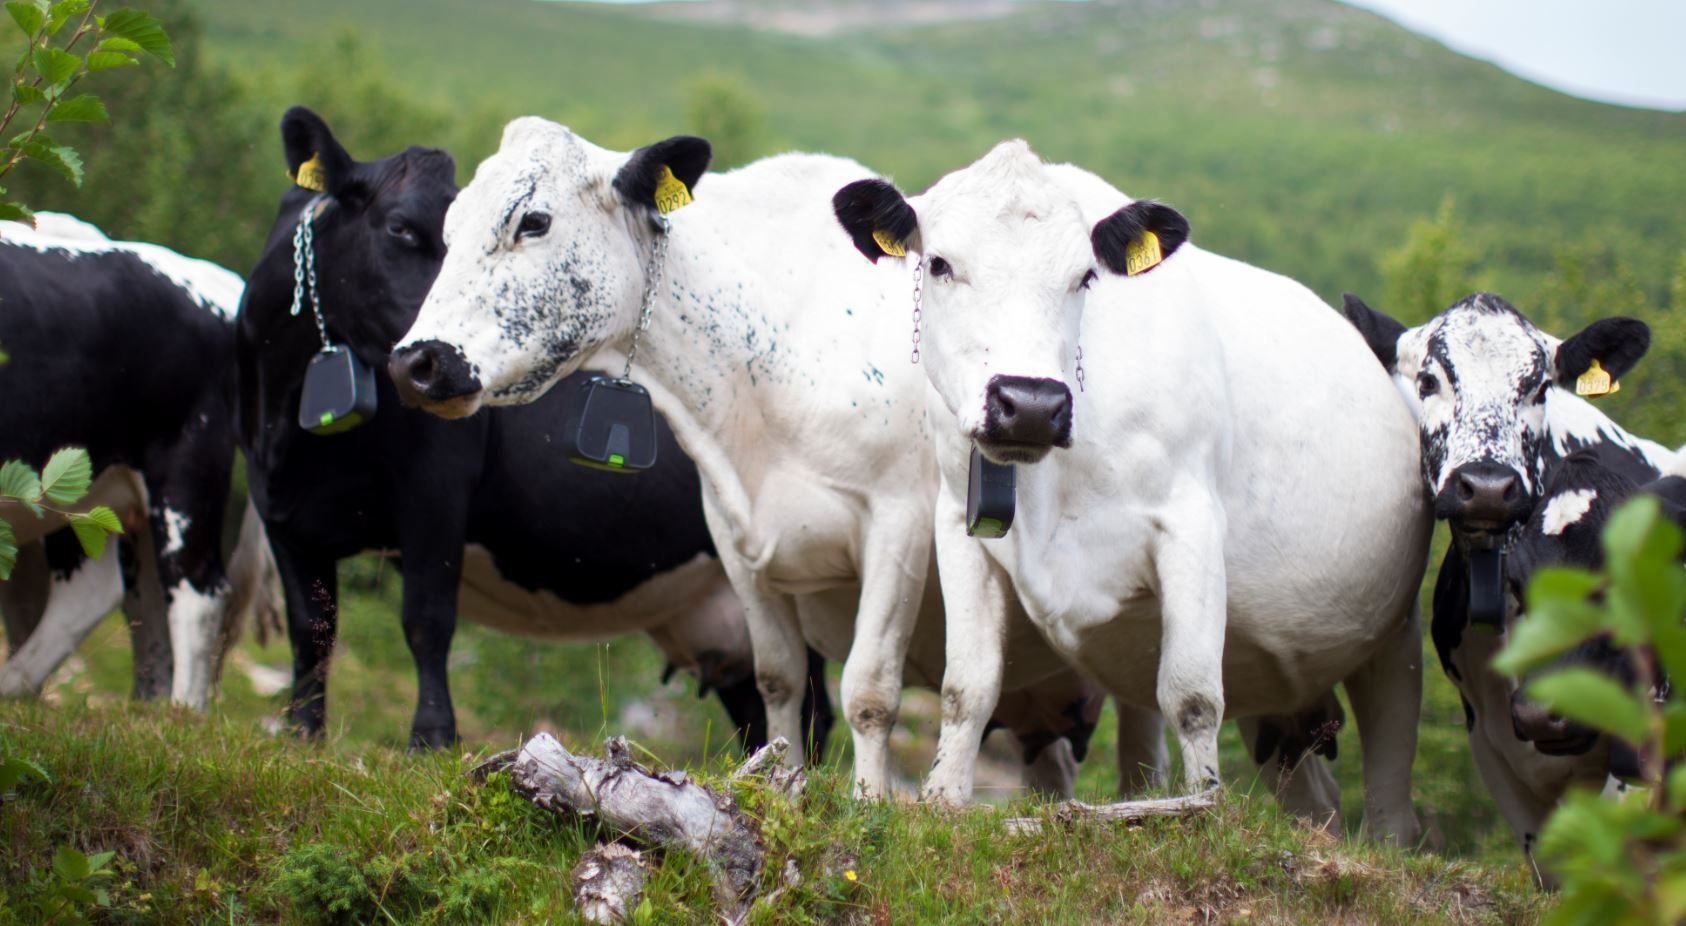 IoT Cows roaming in nature